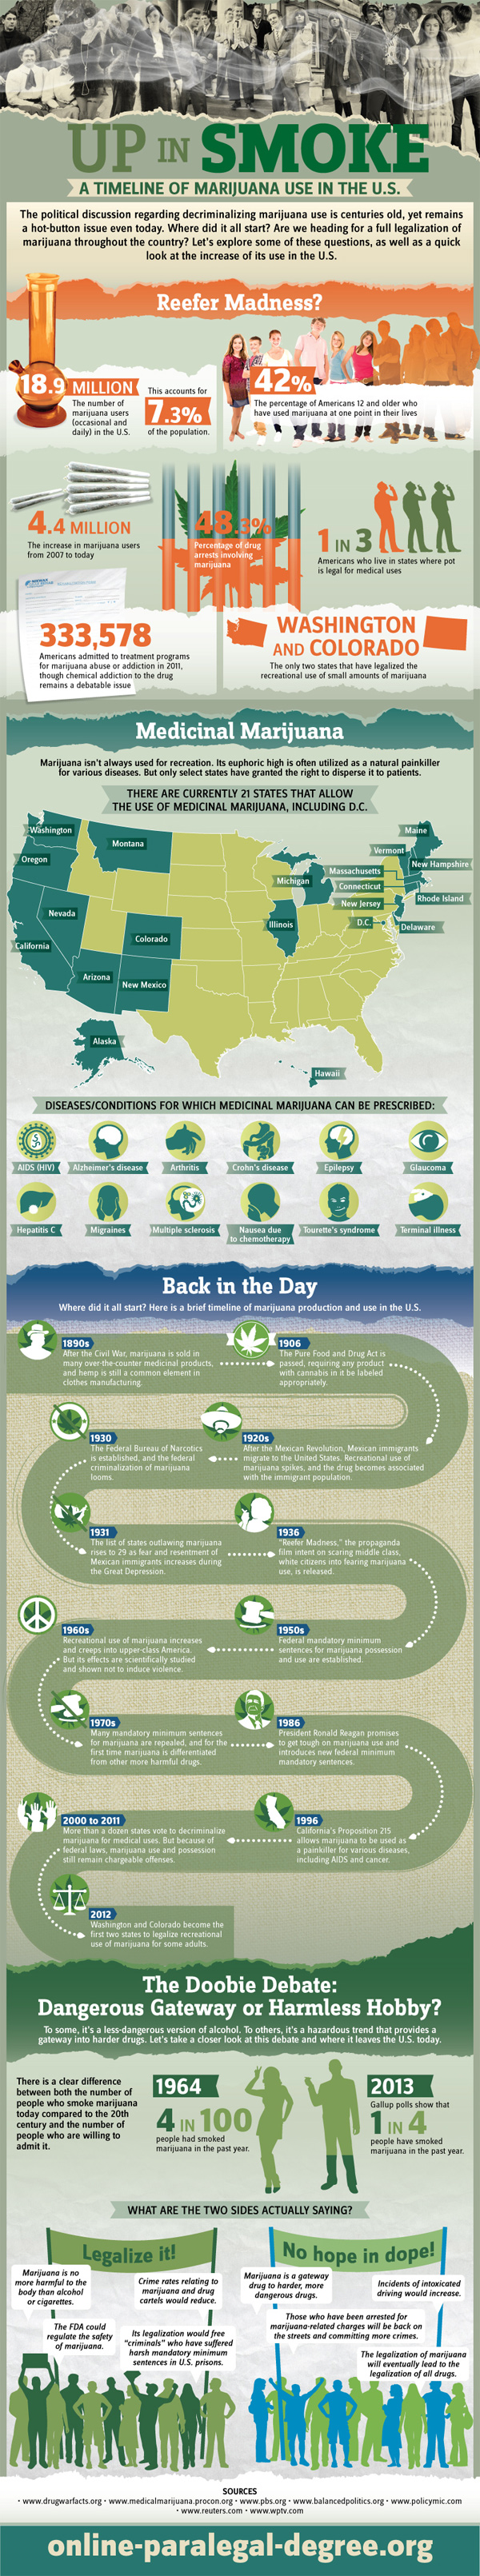 History of Marijuana Use in the US-Infographic